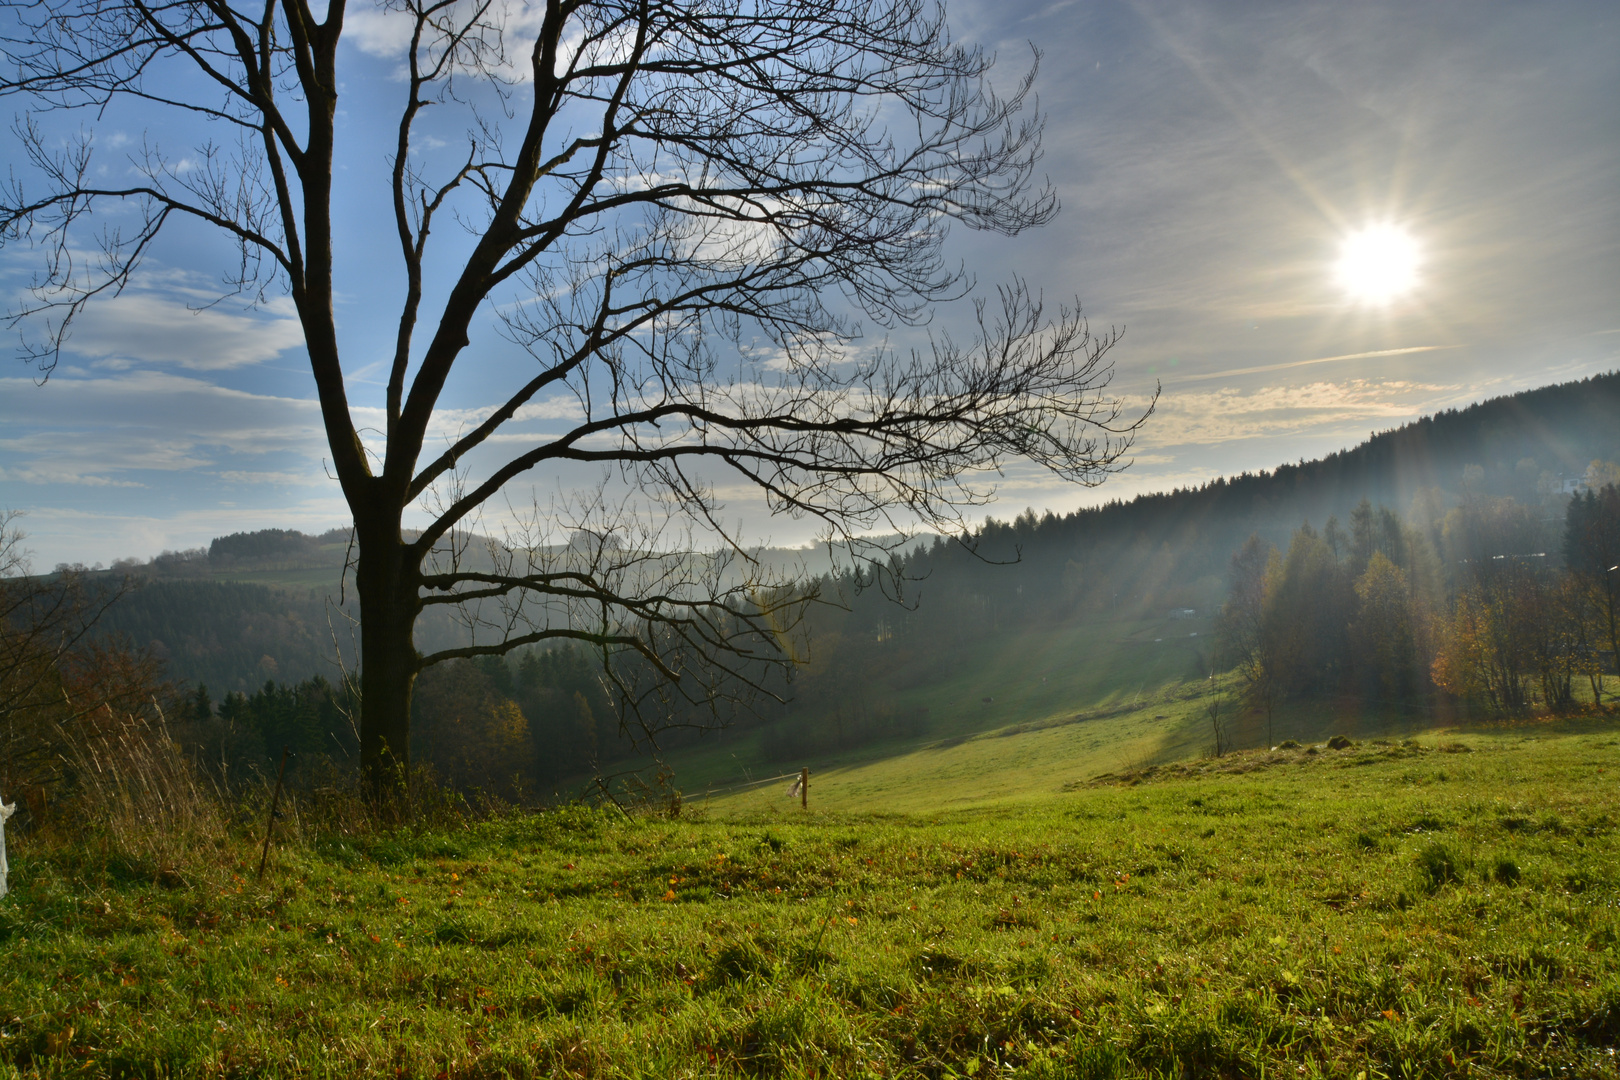 Early in the morning @ The Ore Mountains